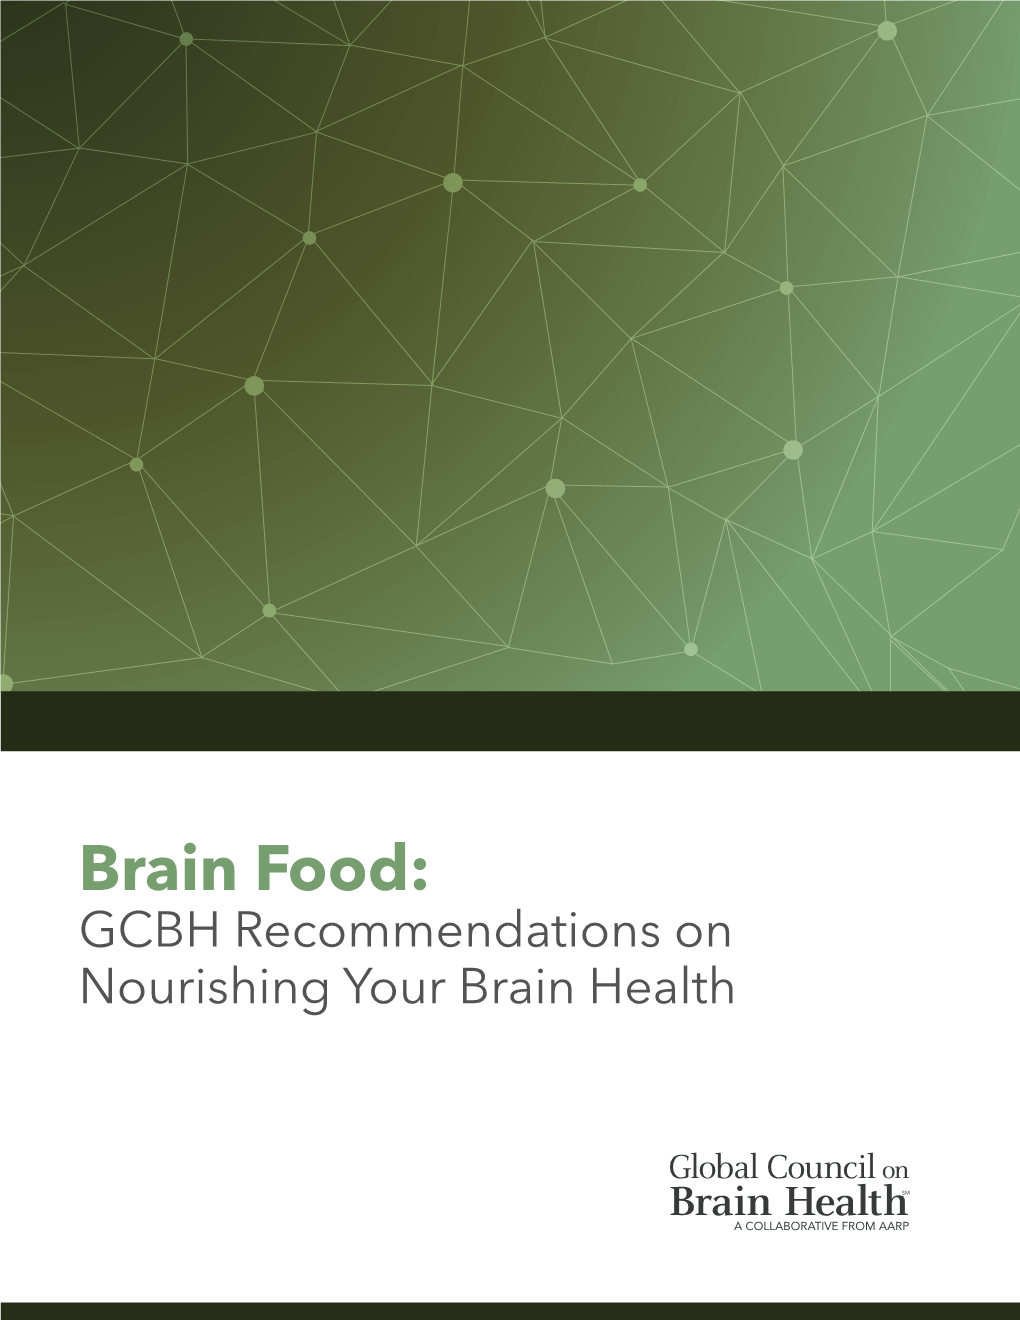 Brain Food: GCBH Recommendations on Nourishing Your Brain Health BACKGROUND: ABOUT GCBH and ITS WORK